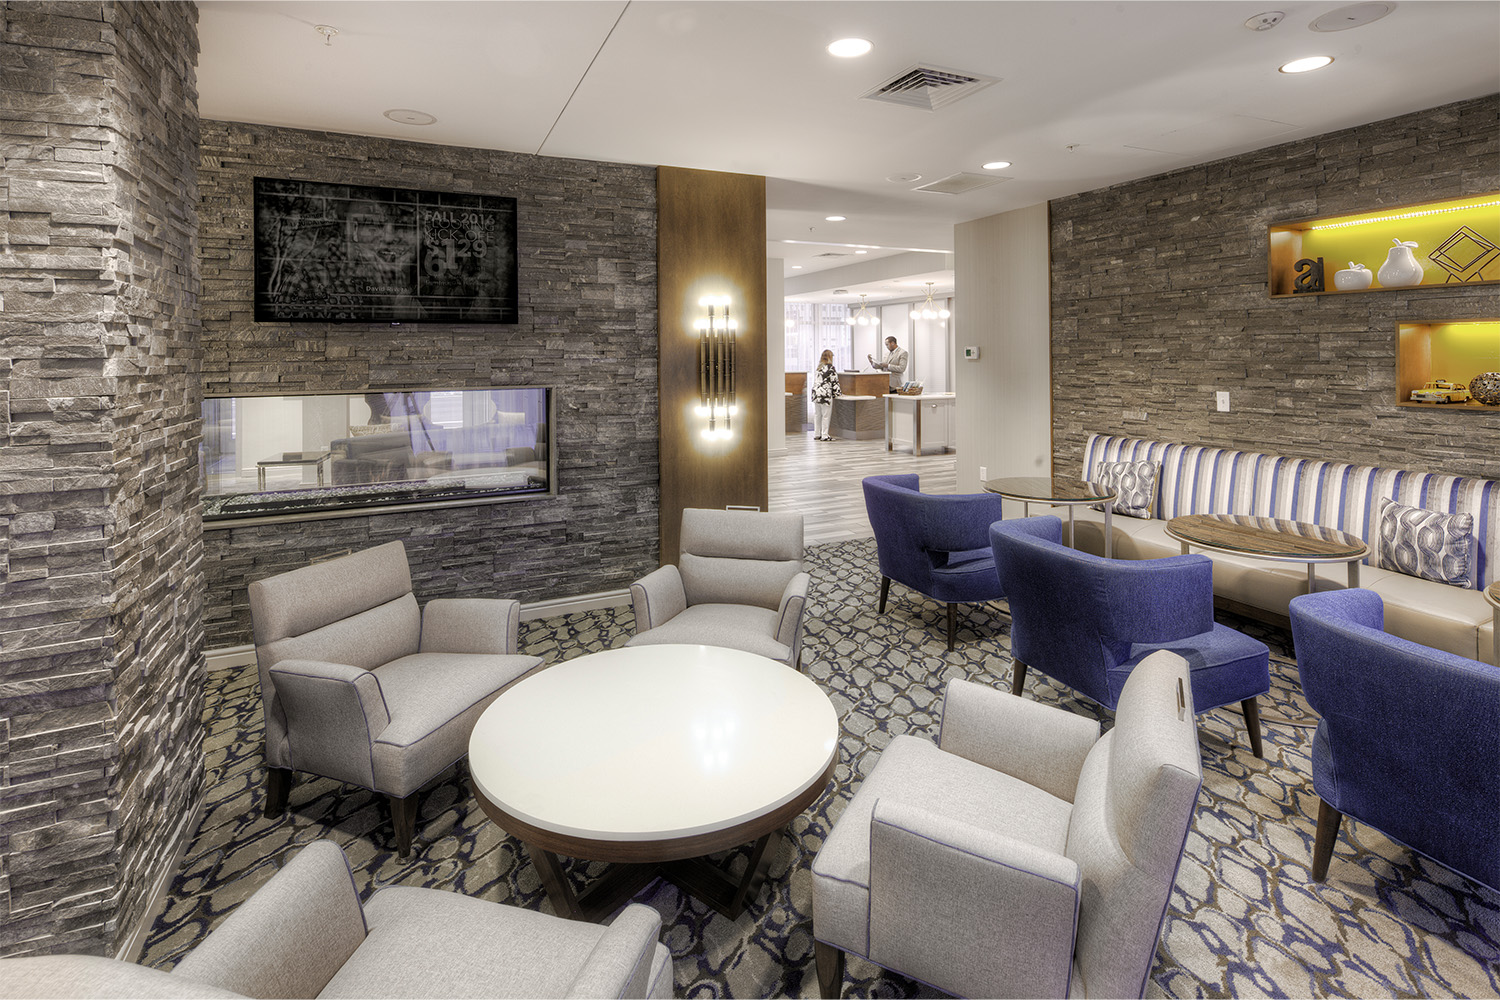 Lounge area with stone walls, and plush couches and chairs 